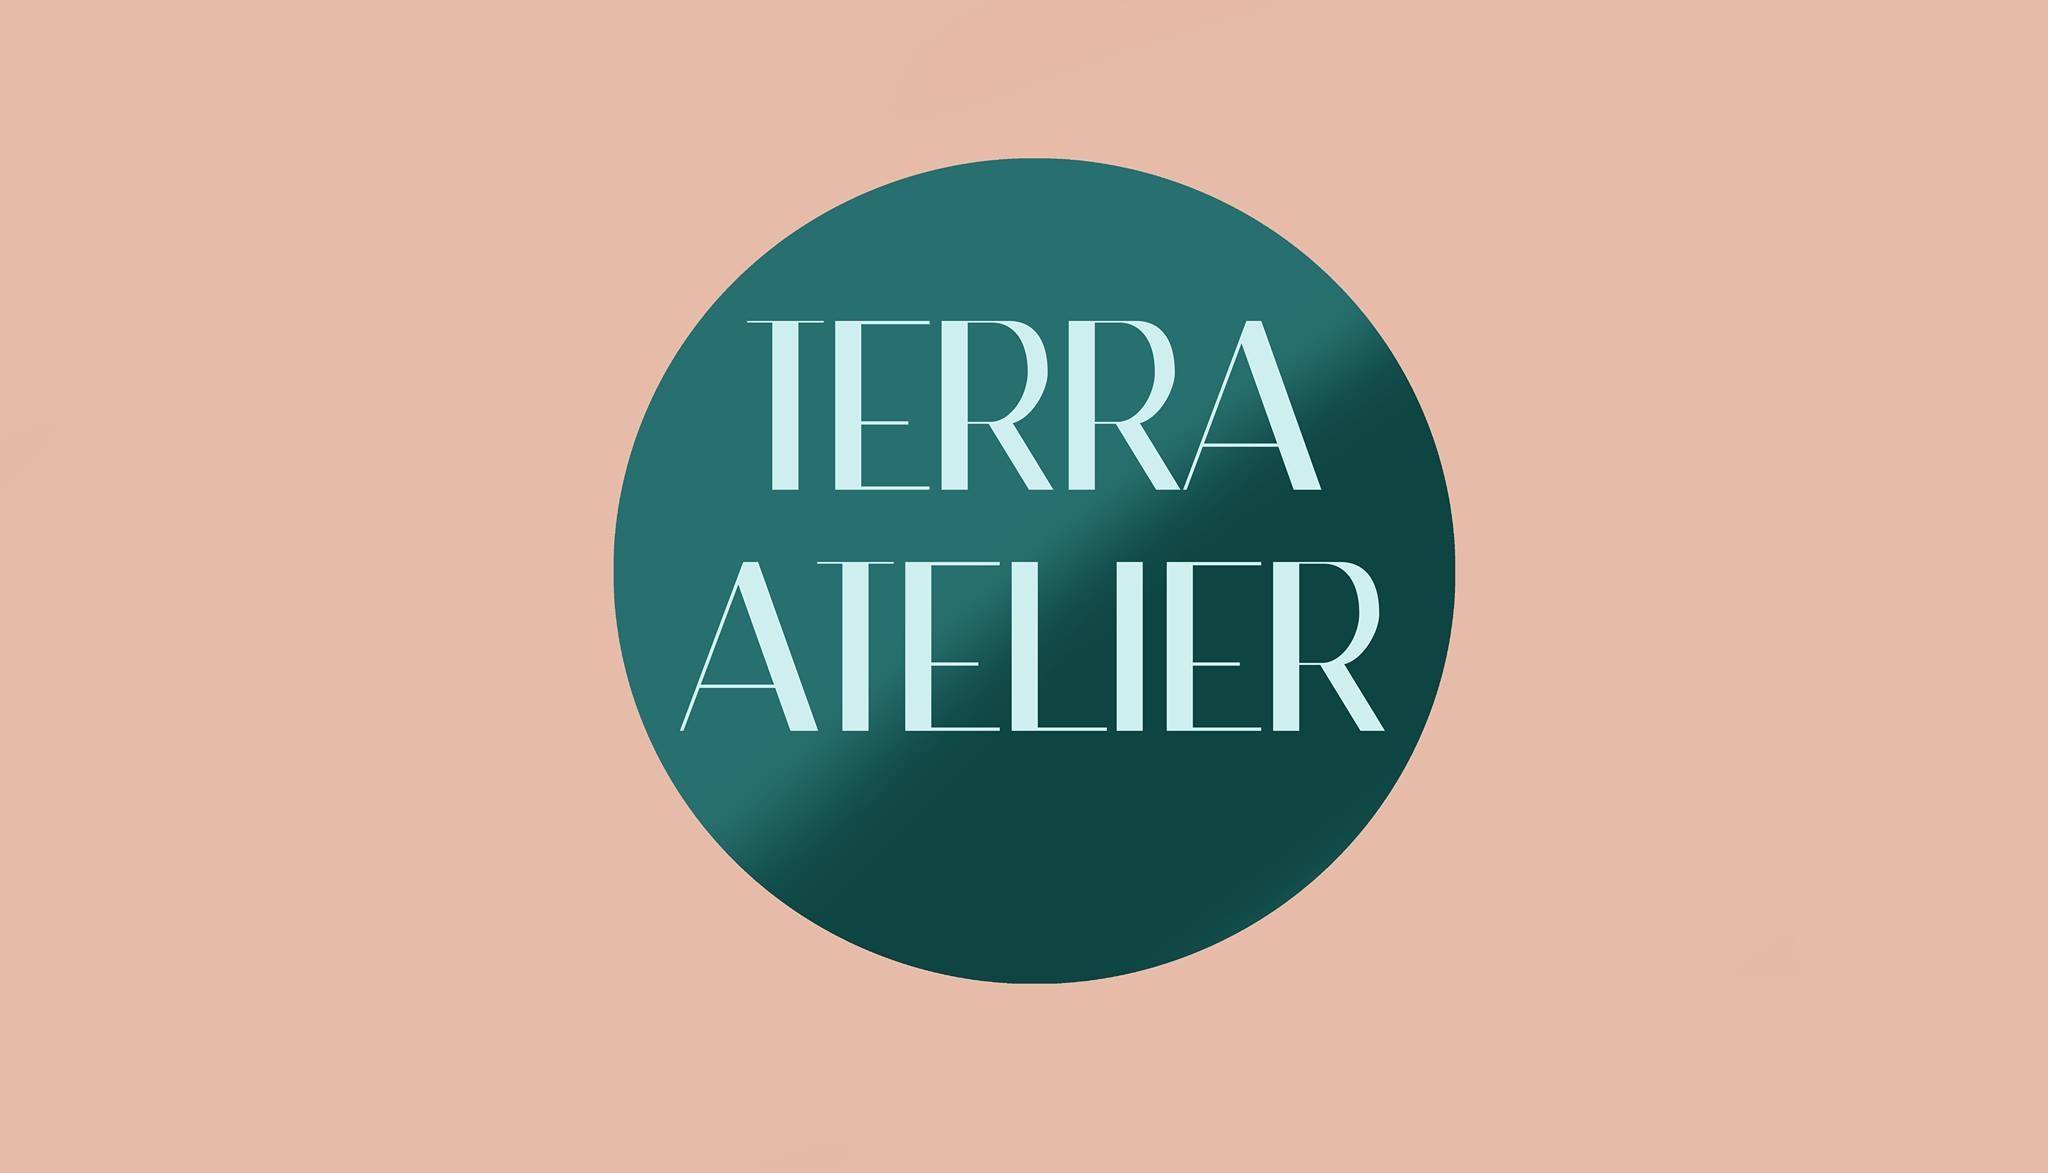 Terra Atelier|Accounting Services|Professional Services